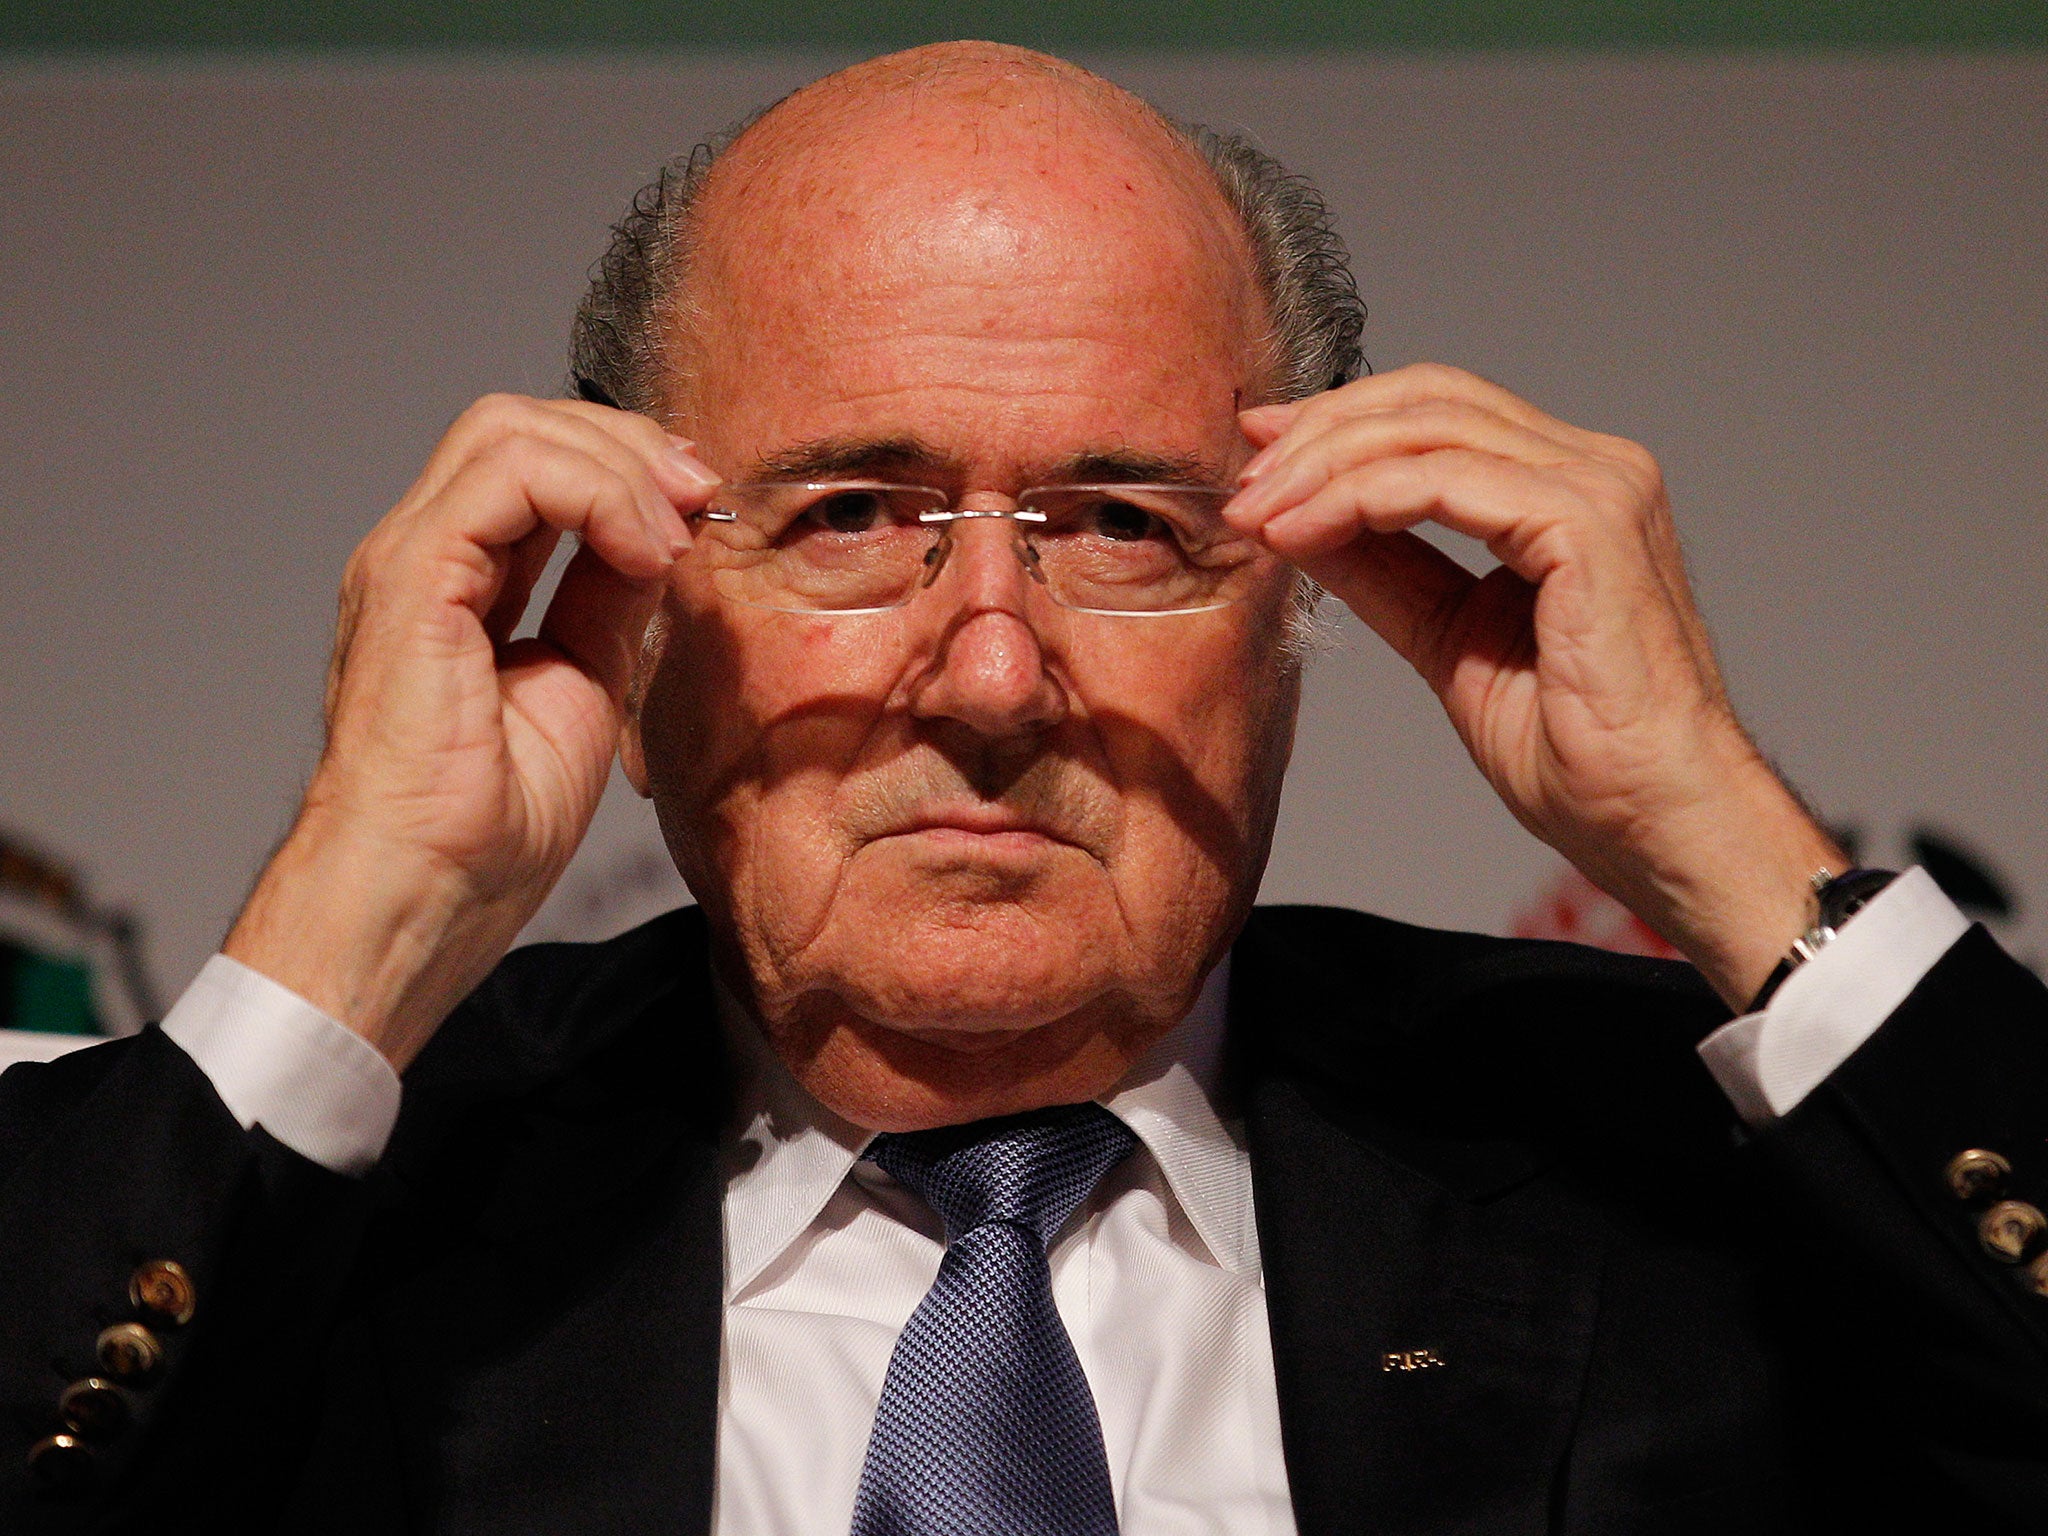 Sepp Blatter, who has been Fifa president since 1998, will stand for re-election again